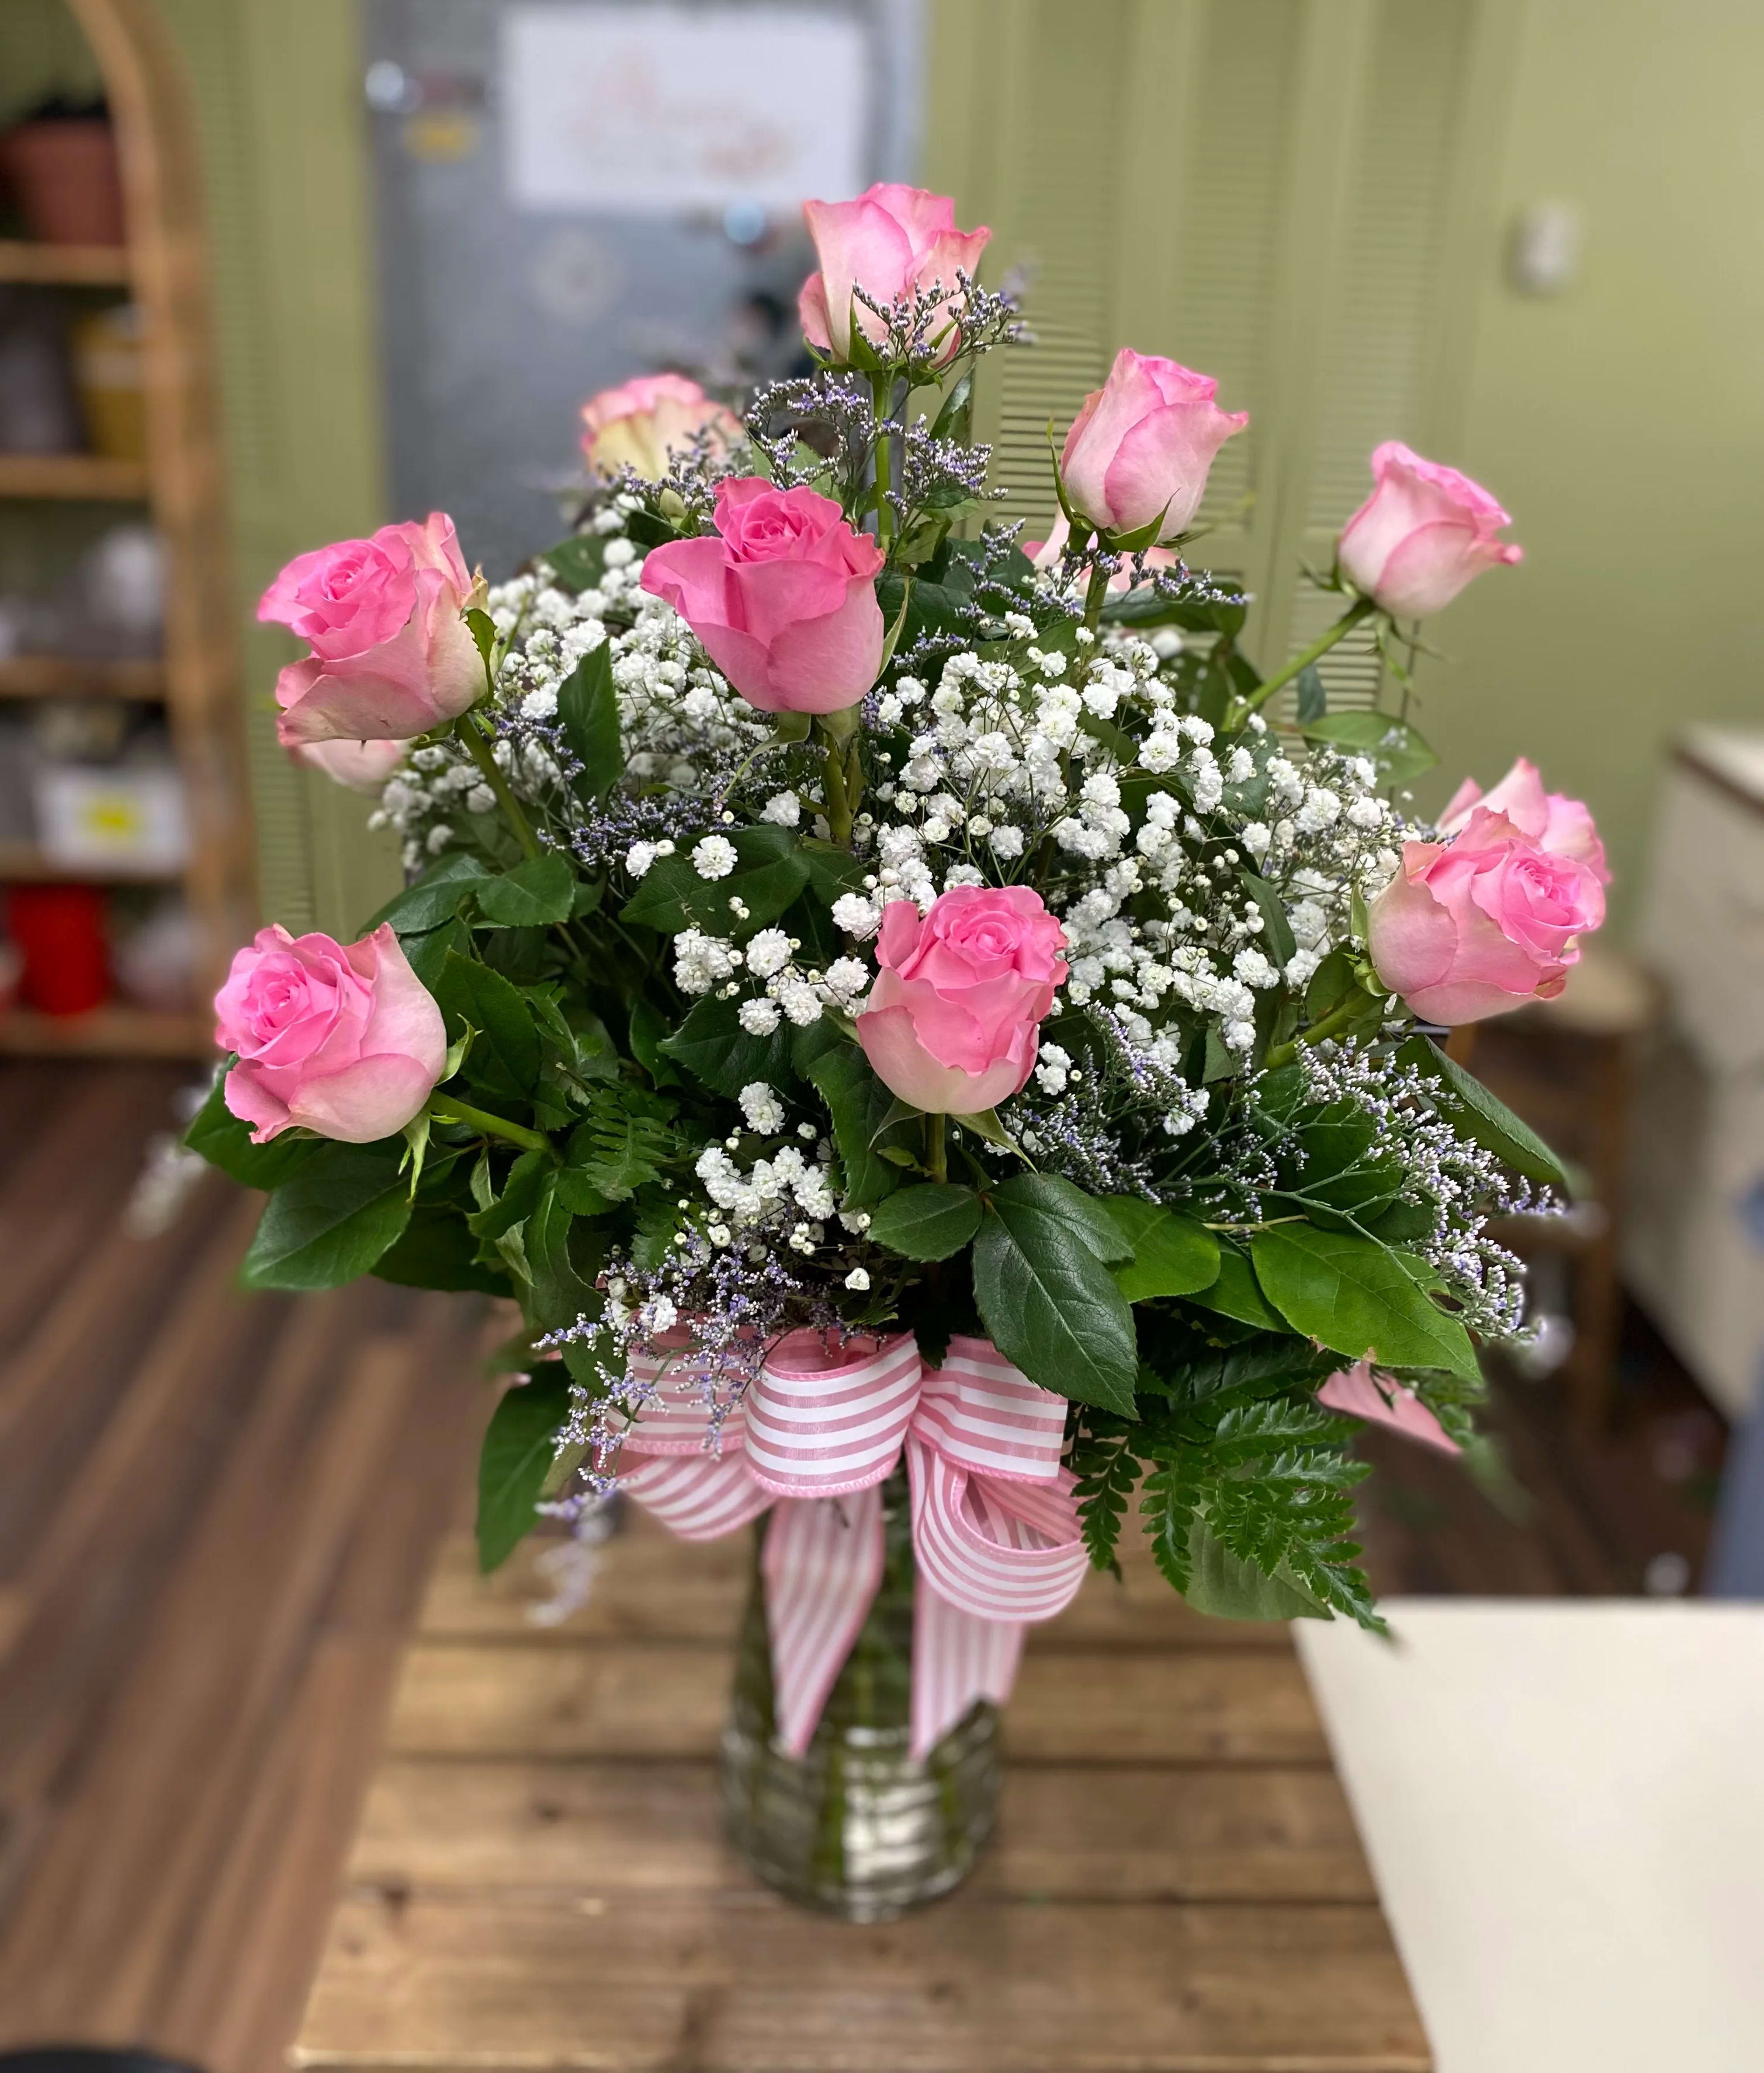 Dozen Hot Pink Roses with Babies breath &amp; Caspia.-BN - SHADES OF HOT PINK ROSES MIGHT BE DIFFERENT FROM PICTURE. 12 Hot pink roses ( shades of pink may vary ). The arrangement  will include SEASONAL greenery and fillers , a glass Vase ( design of vase may vary ). It will include a bow. 